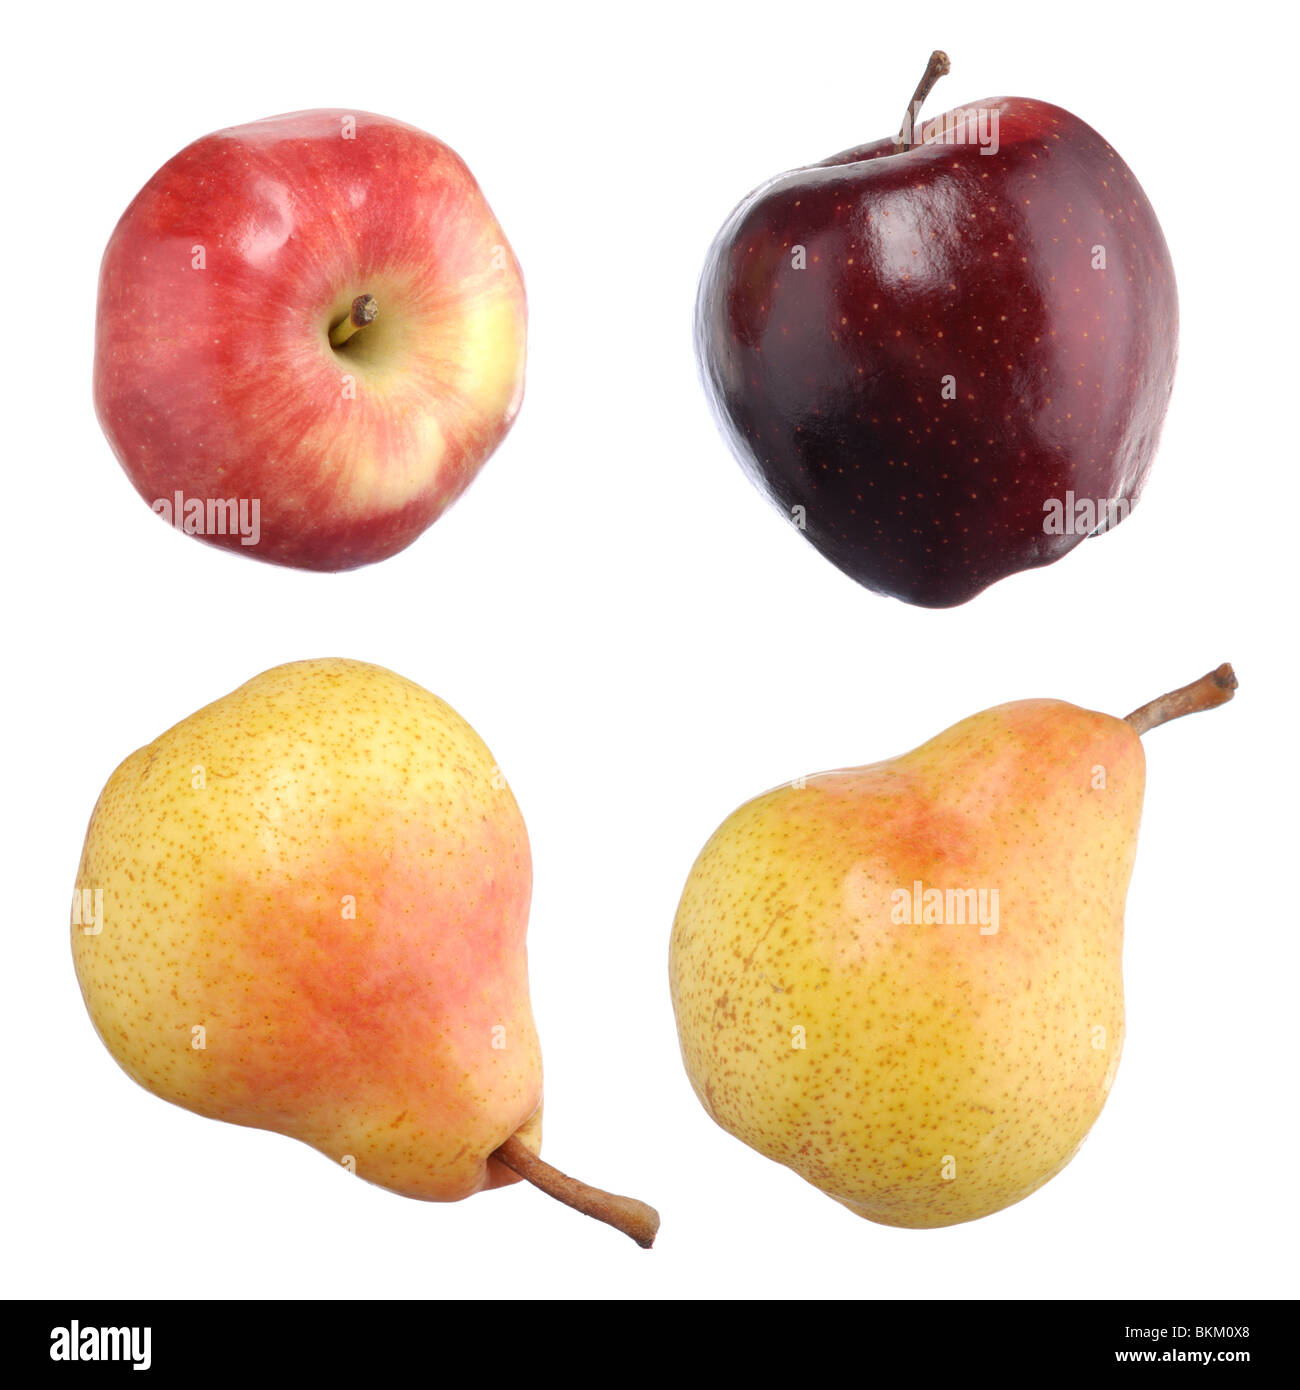 Closeup of red apples and yellow pears isolated on white background Stock Photo